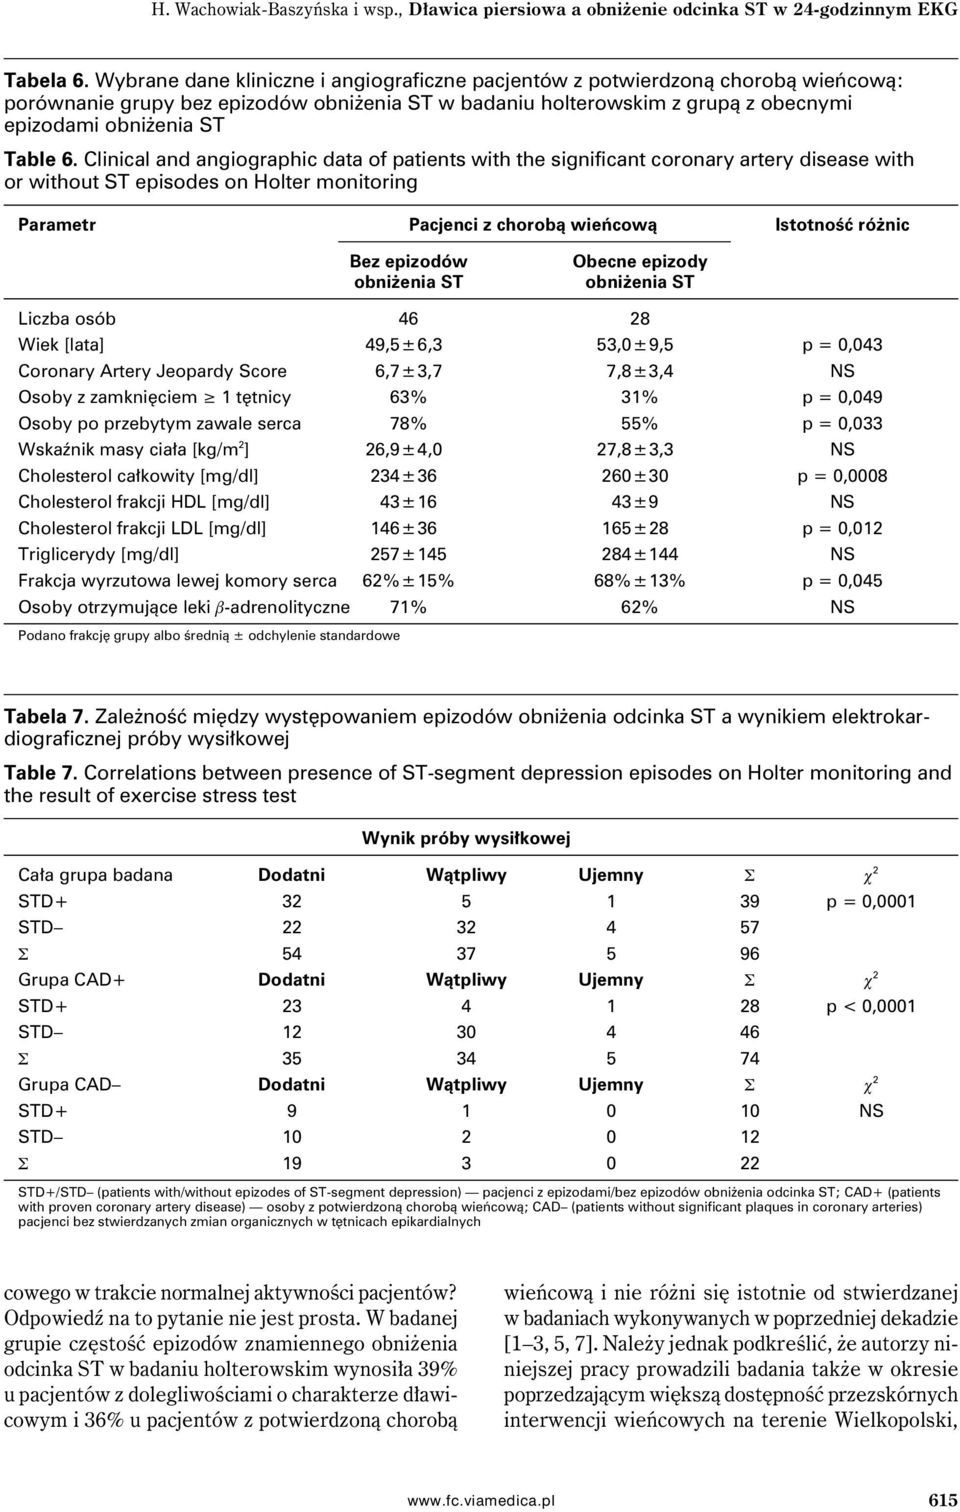 Clinical and angiographic data of patients with the significant coronary artery disease with or without ST episodes on Holter monitoring Parametr Pacjenci z chorobą wieńcową Istotność różnic Bez